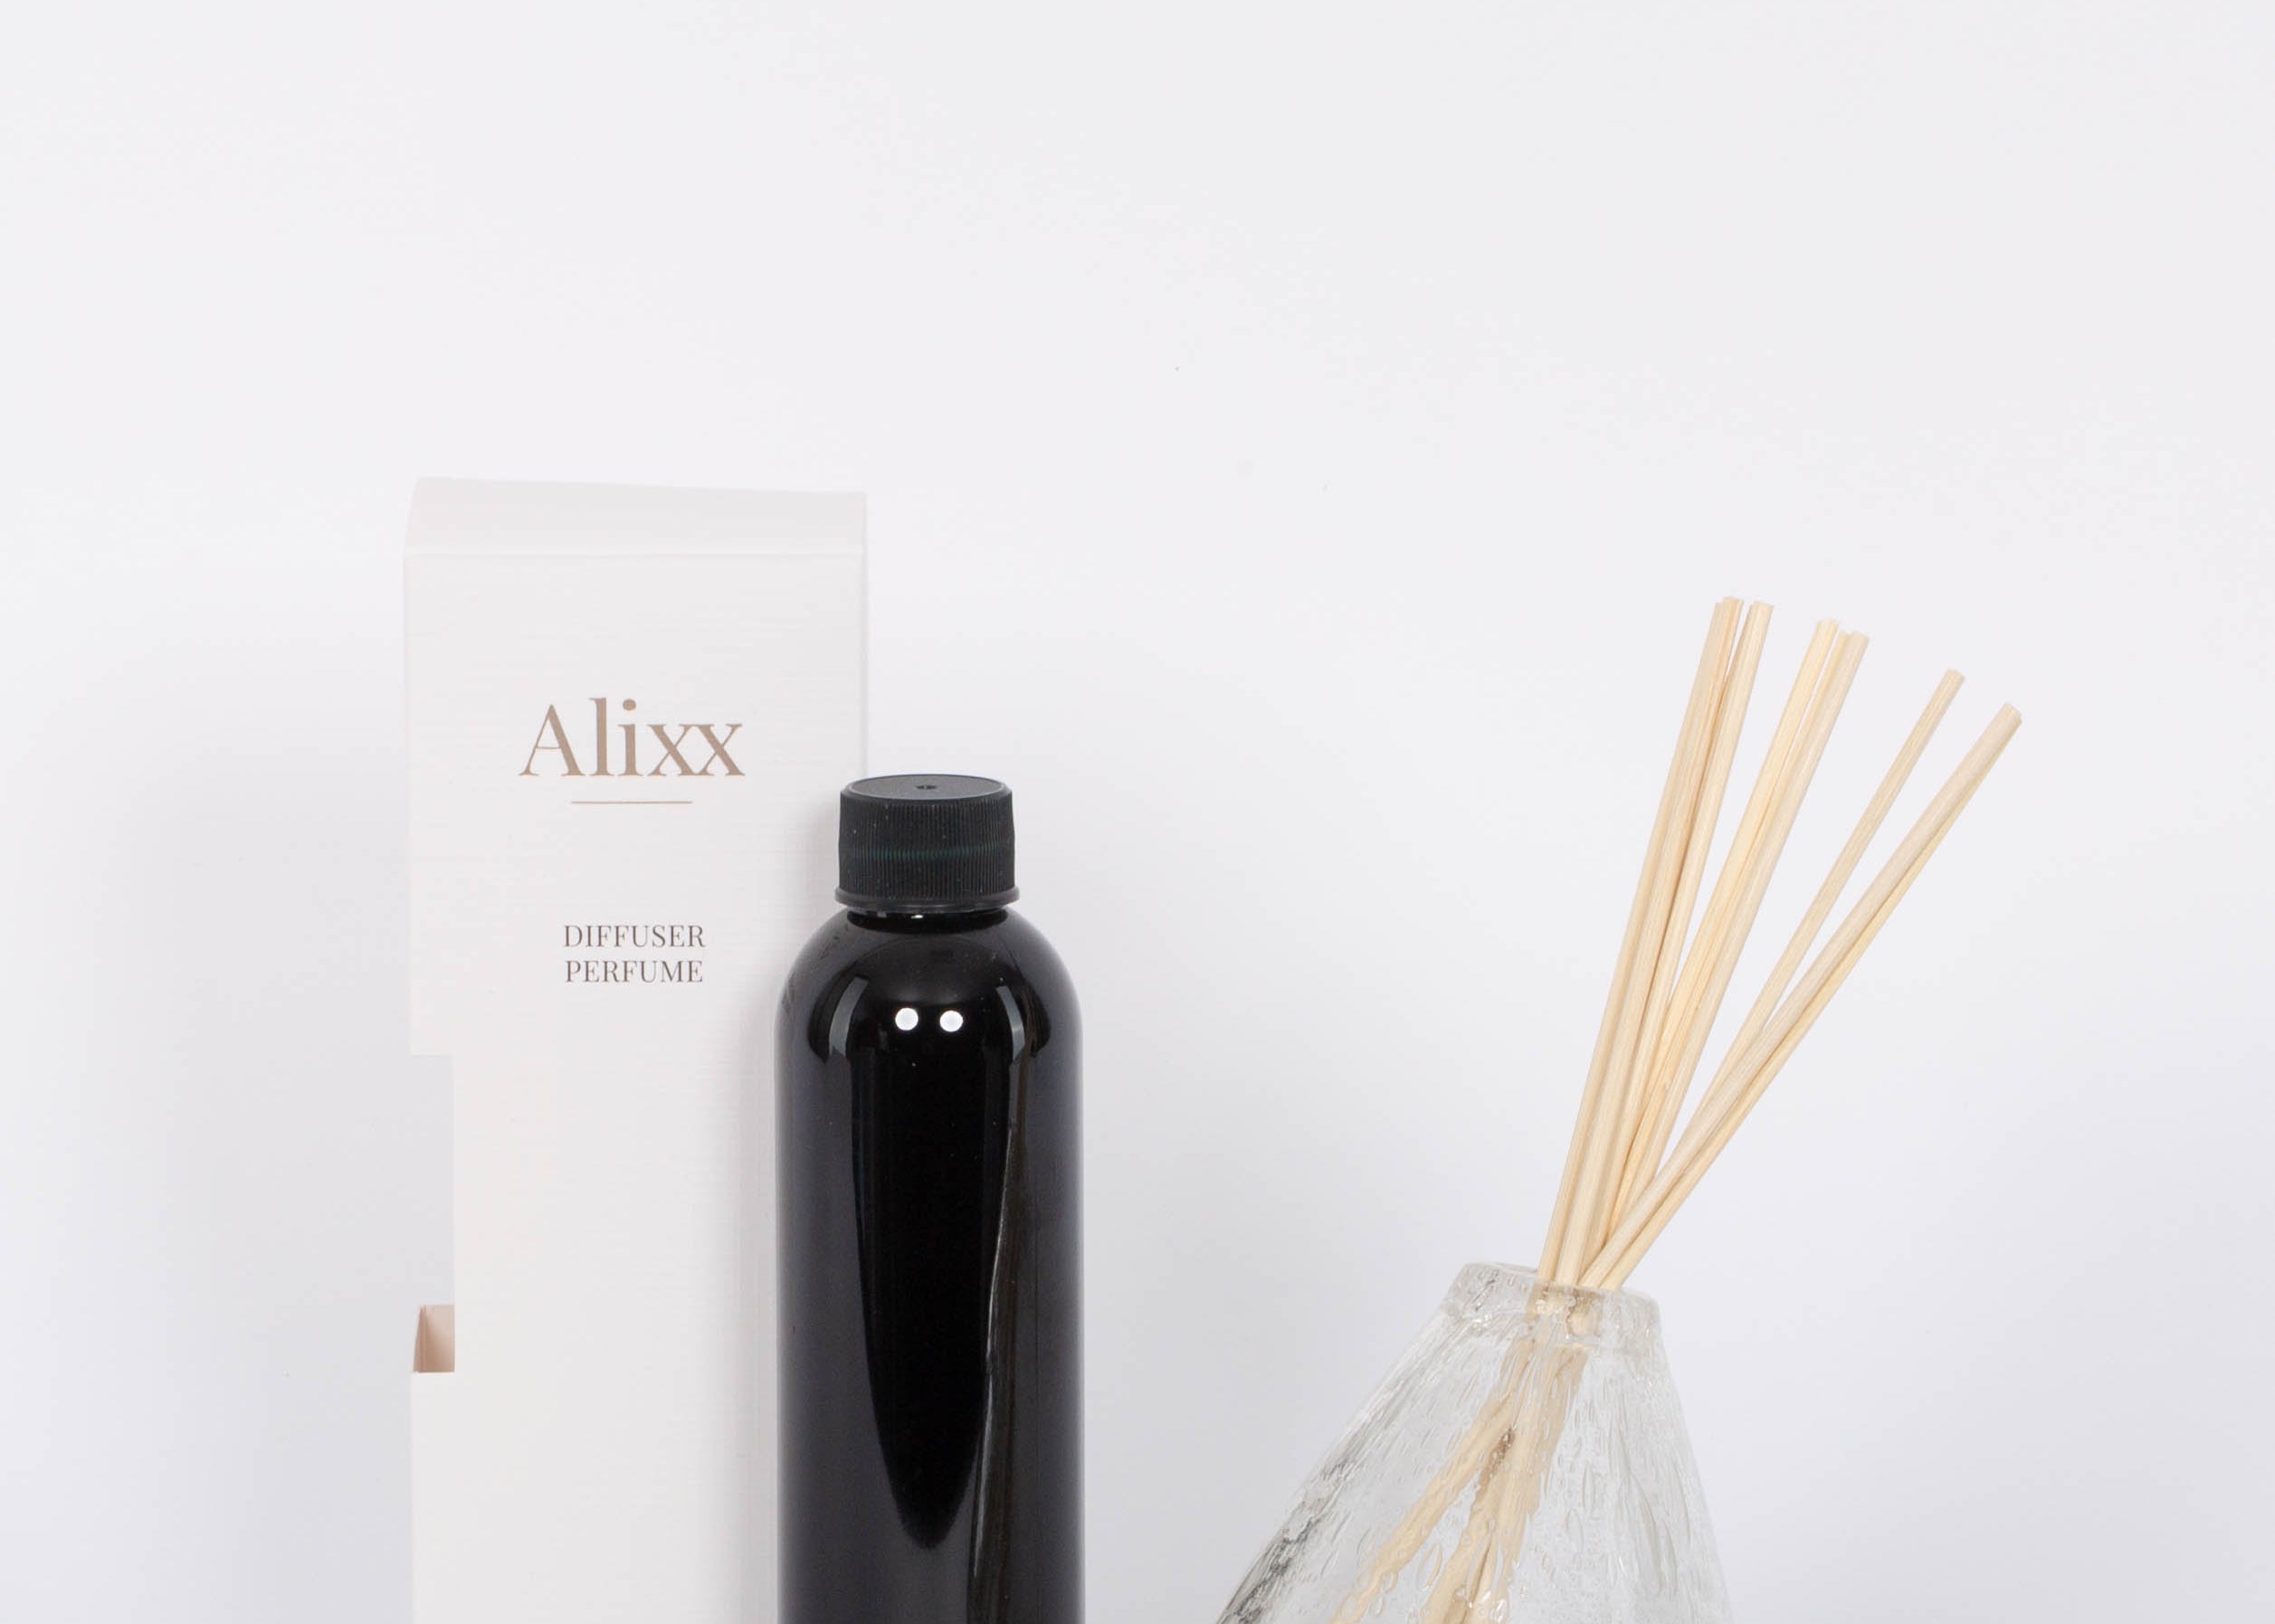 Heure du Thé Diffuser Set by Alixx with vase, scent sticks, and refill bottle. White background. 